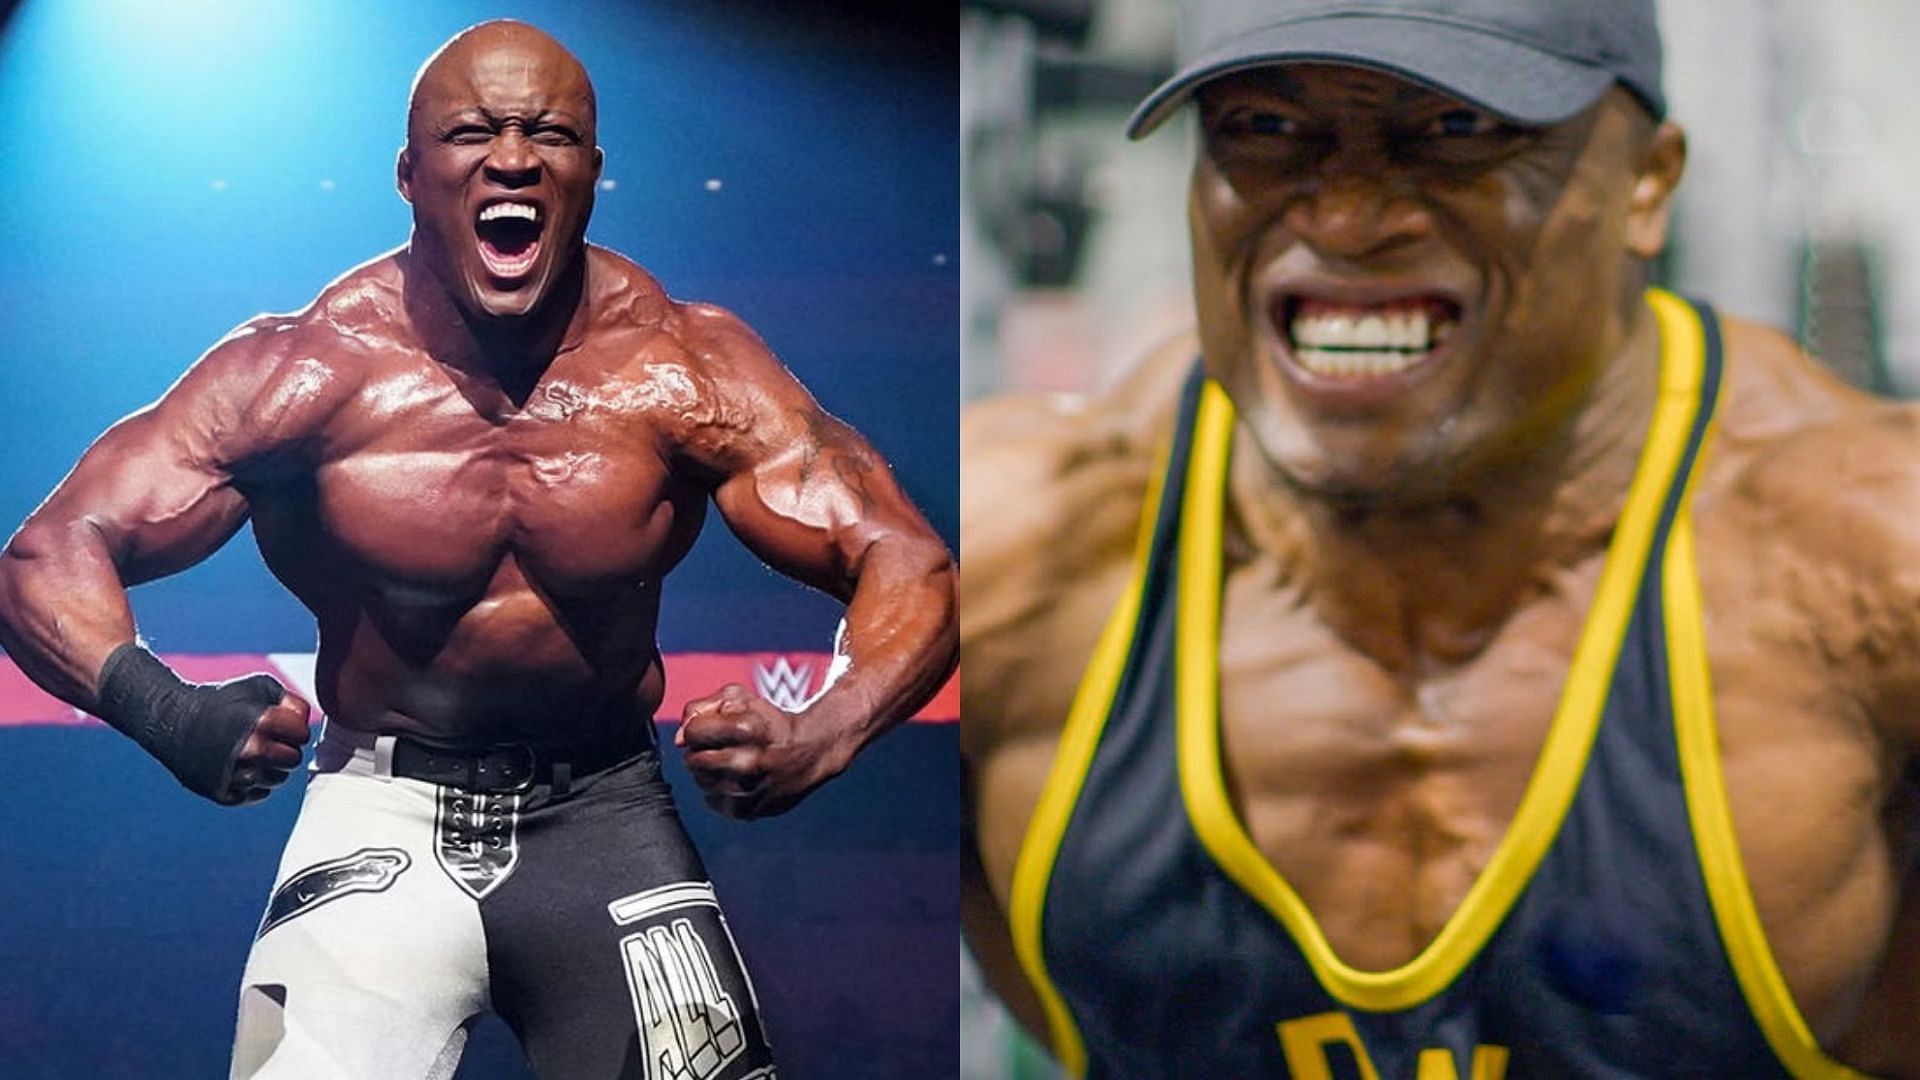 WWE Superstar Bobby Lashley pulls off another impressive feat